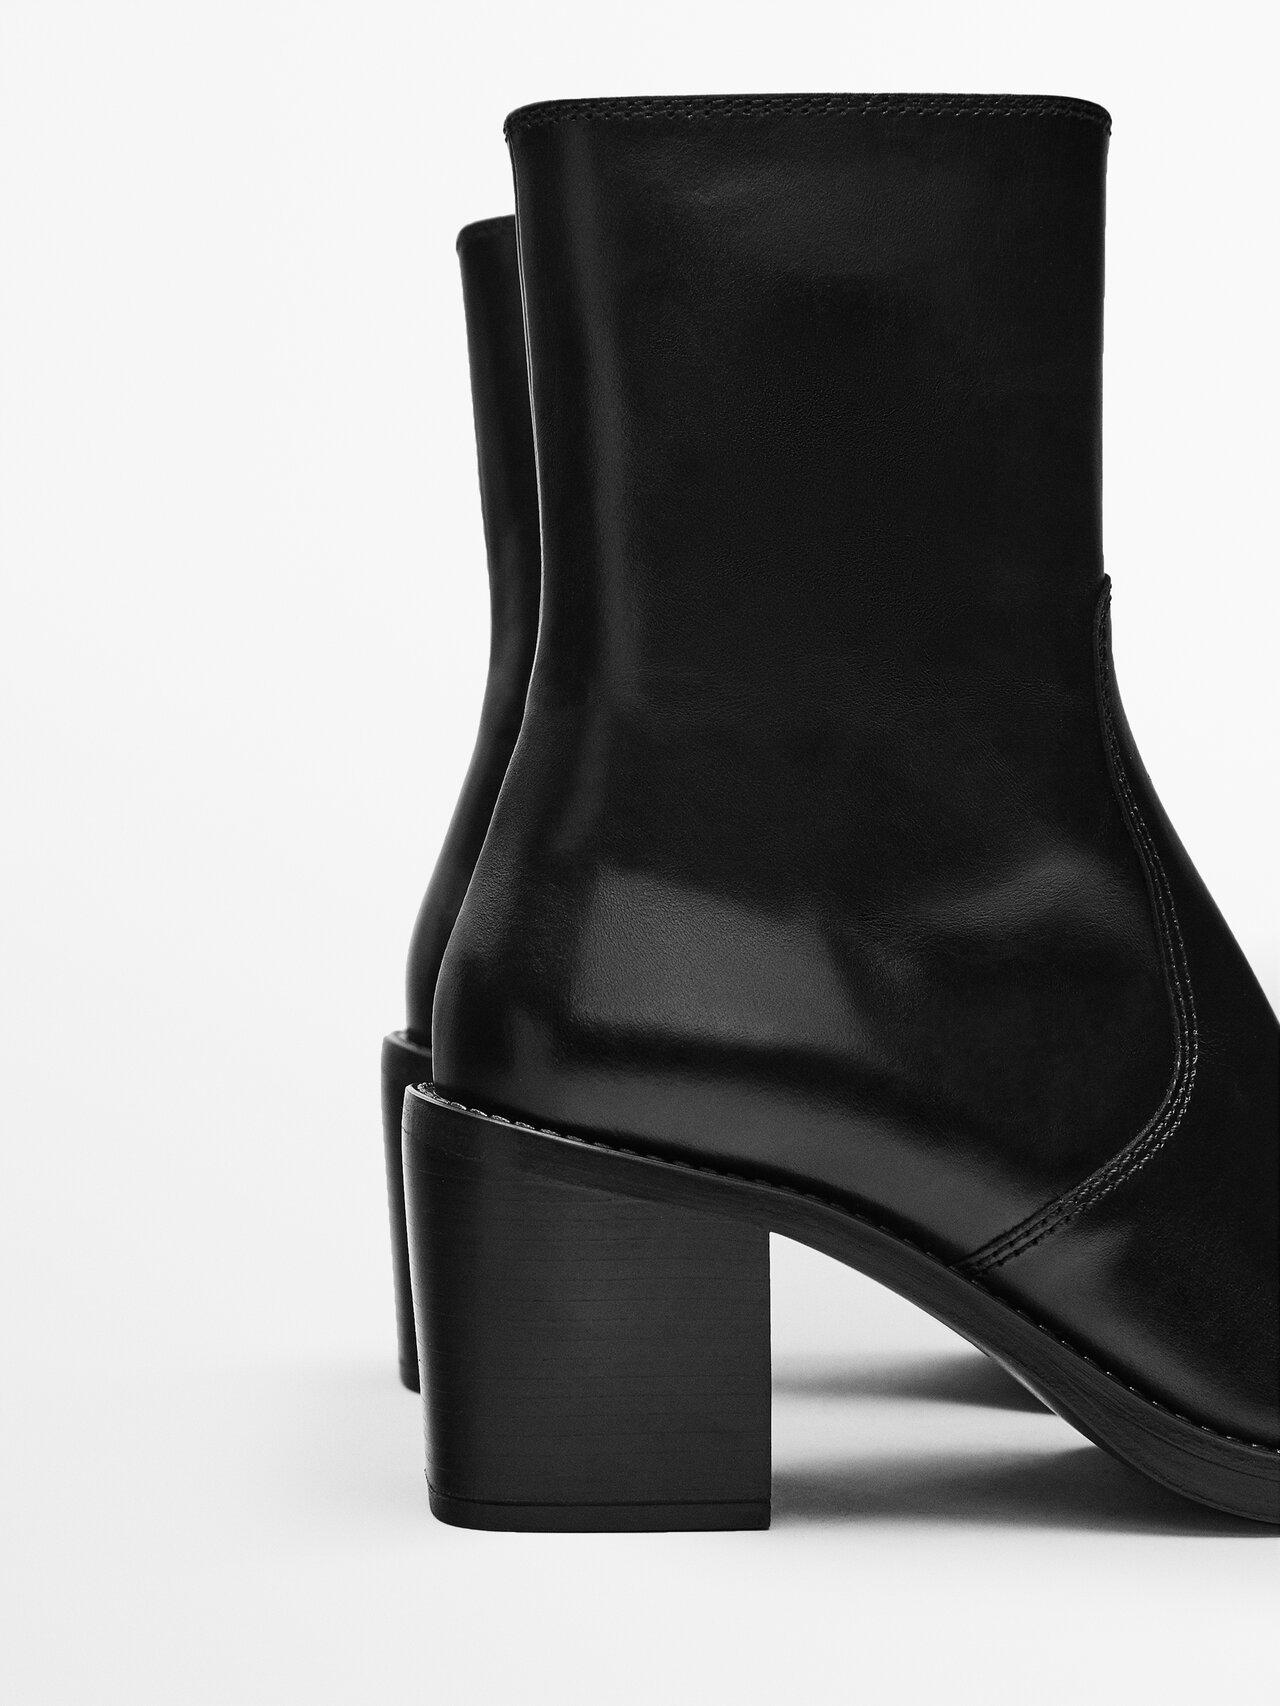 MASSIMO DUTTI Leather Square Heel Ankle Boots in Black | Lyst